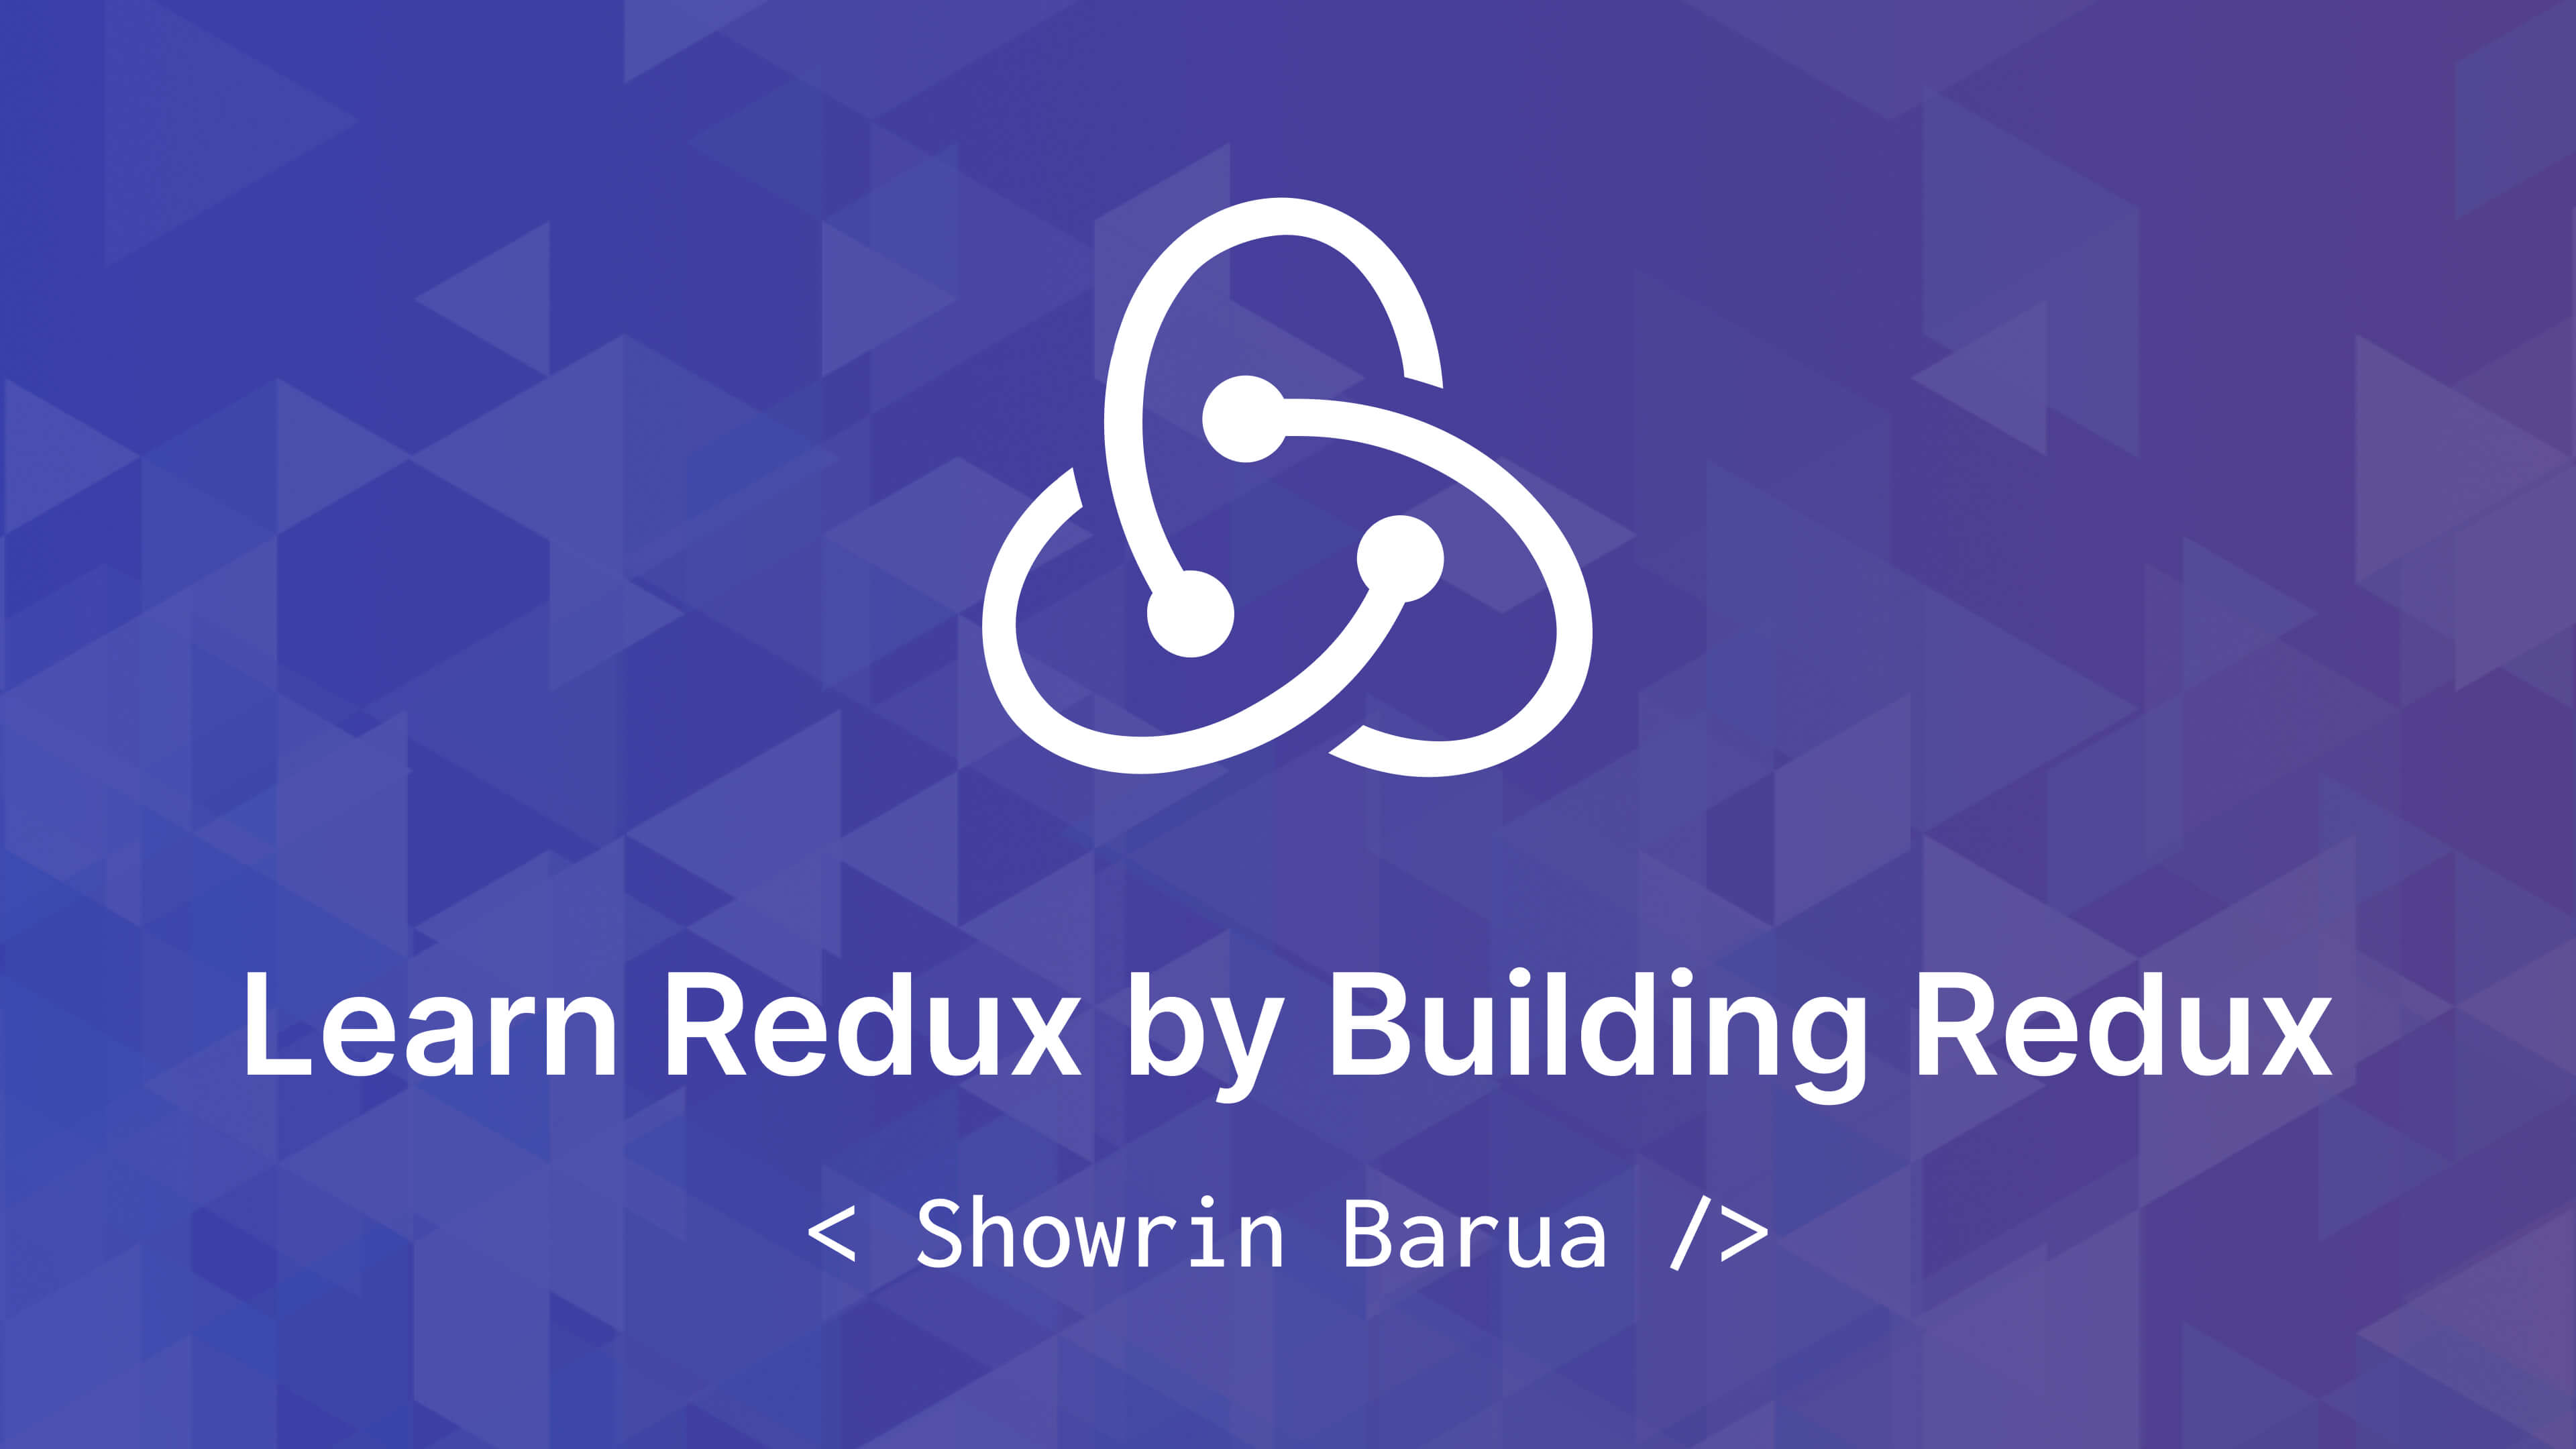 Learn Redux by Building Redux by Showrin